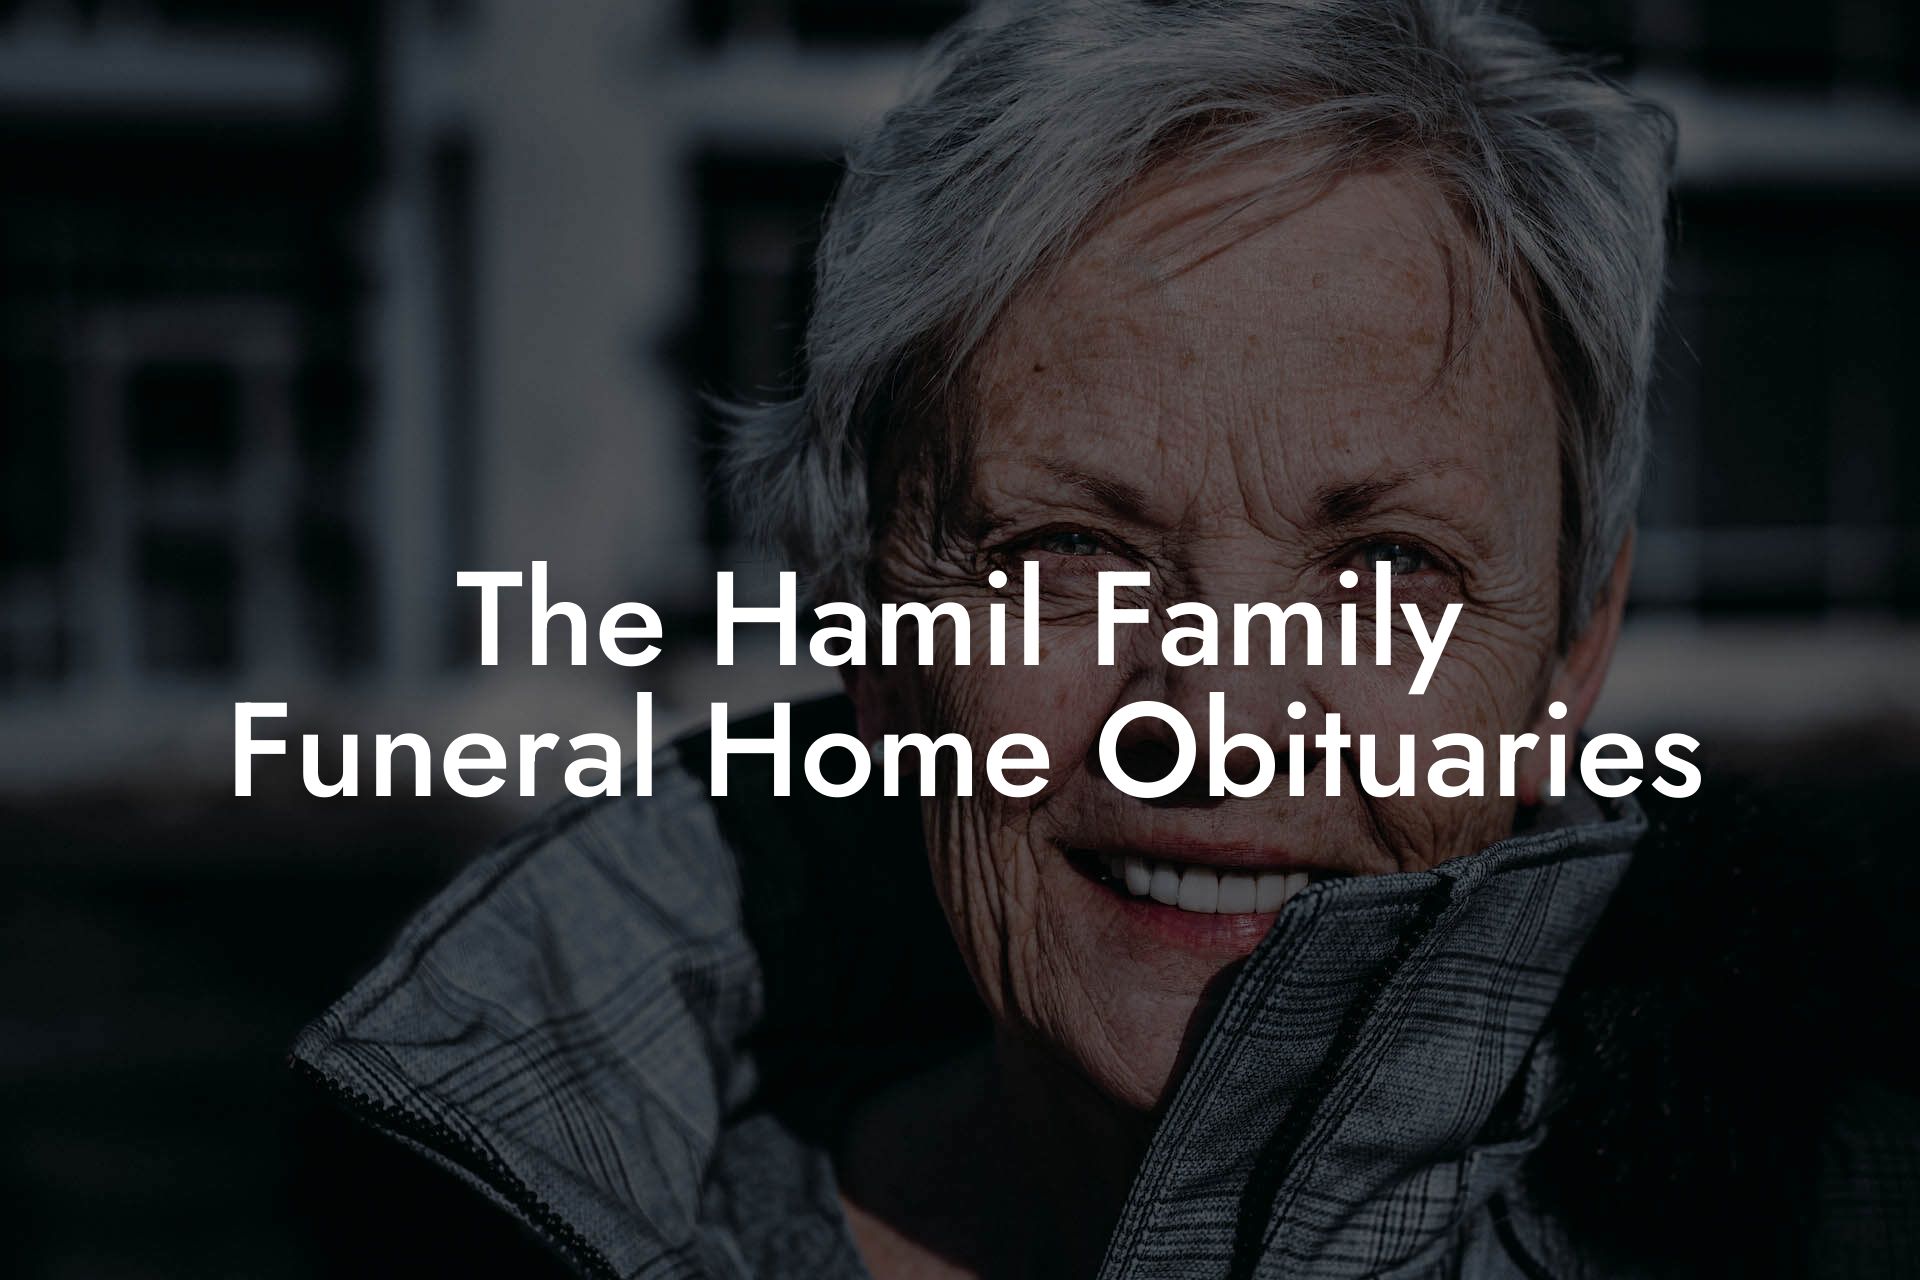 The Hamil Family Funeral Home Obituaries